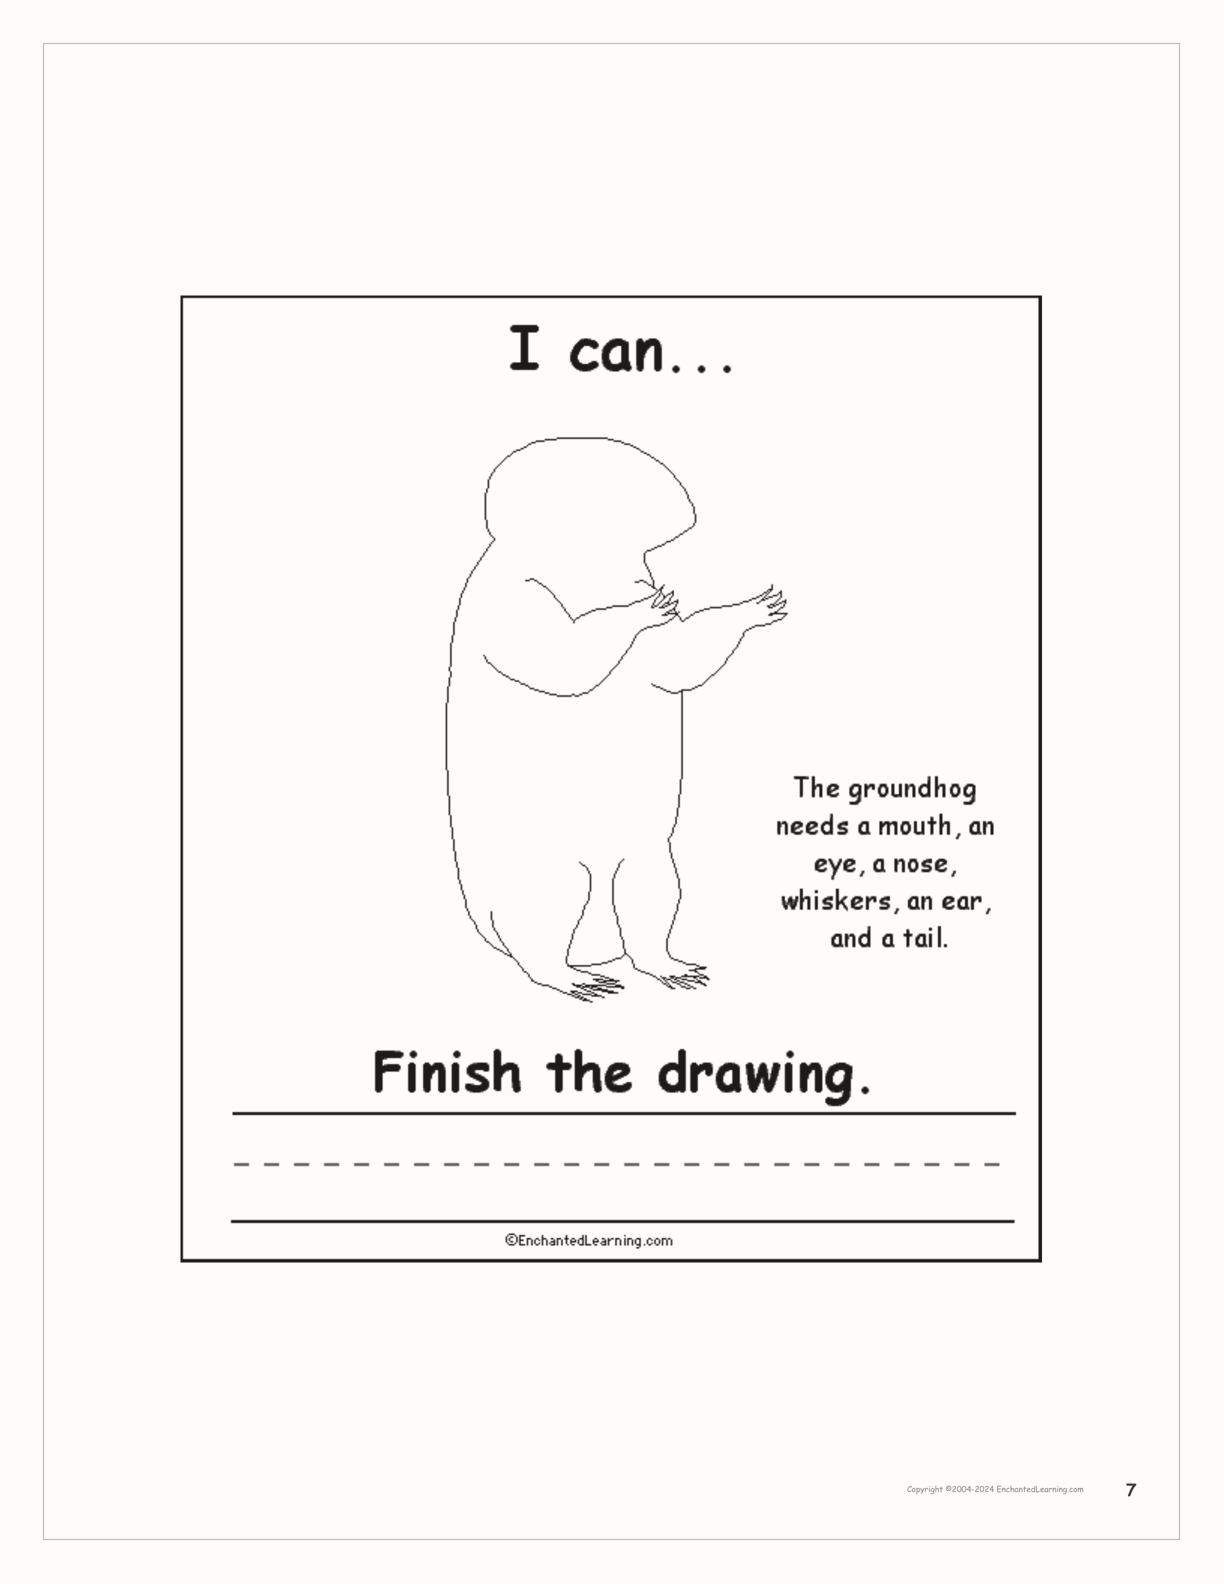 Groundhog Day 'I Can' Book interactive worksheet page 7